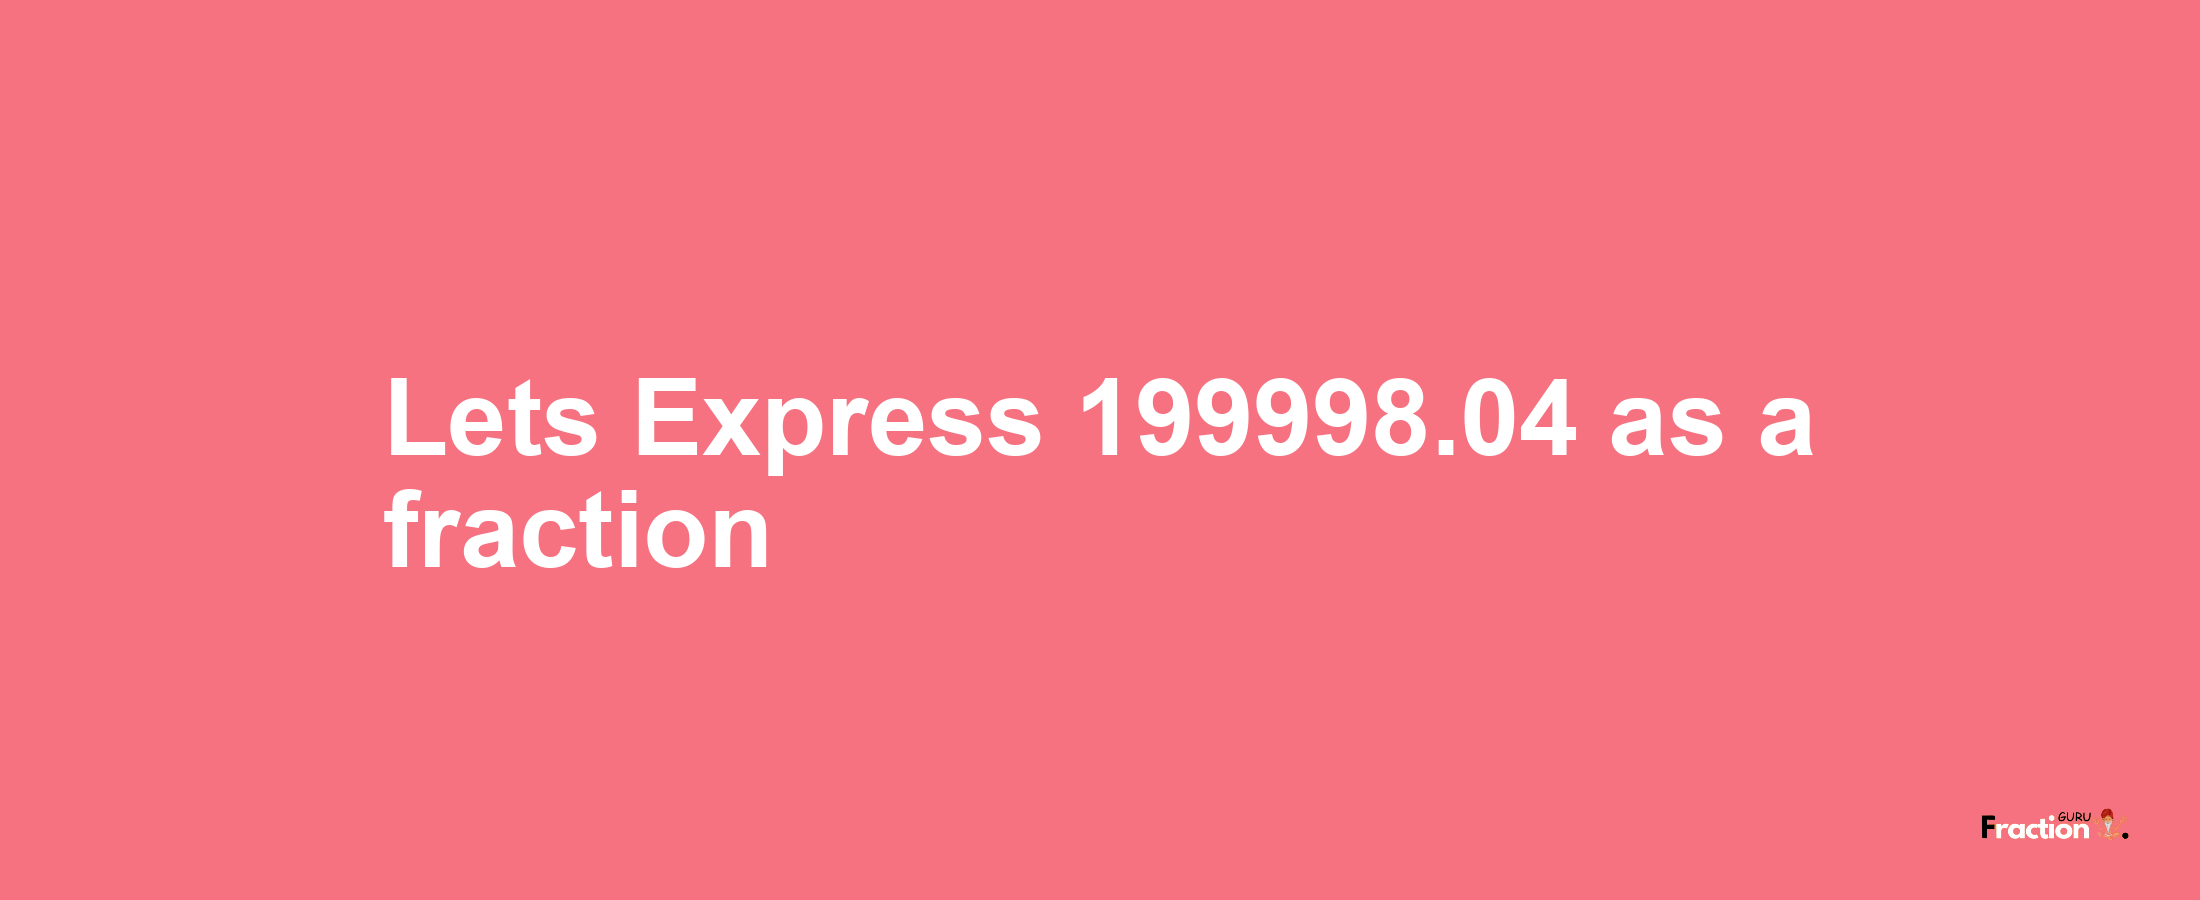 Lets Express 199998.04 as afraction